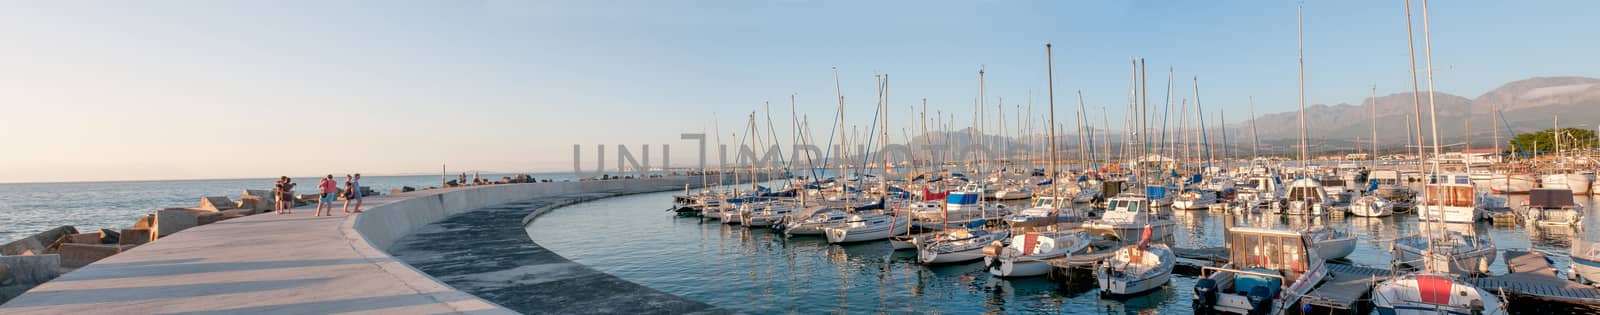 CAPE TOWN, SOUTH AFRICA - DECEMBER 11, 2014:  Sunset panorama of the harbor in Gordons Bay with buildings of Gordons Bay and The Strand in the background